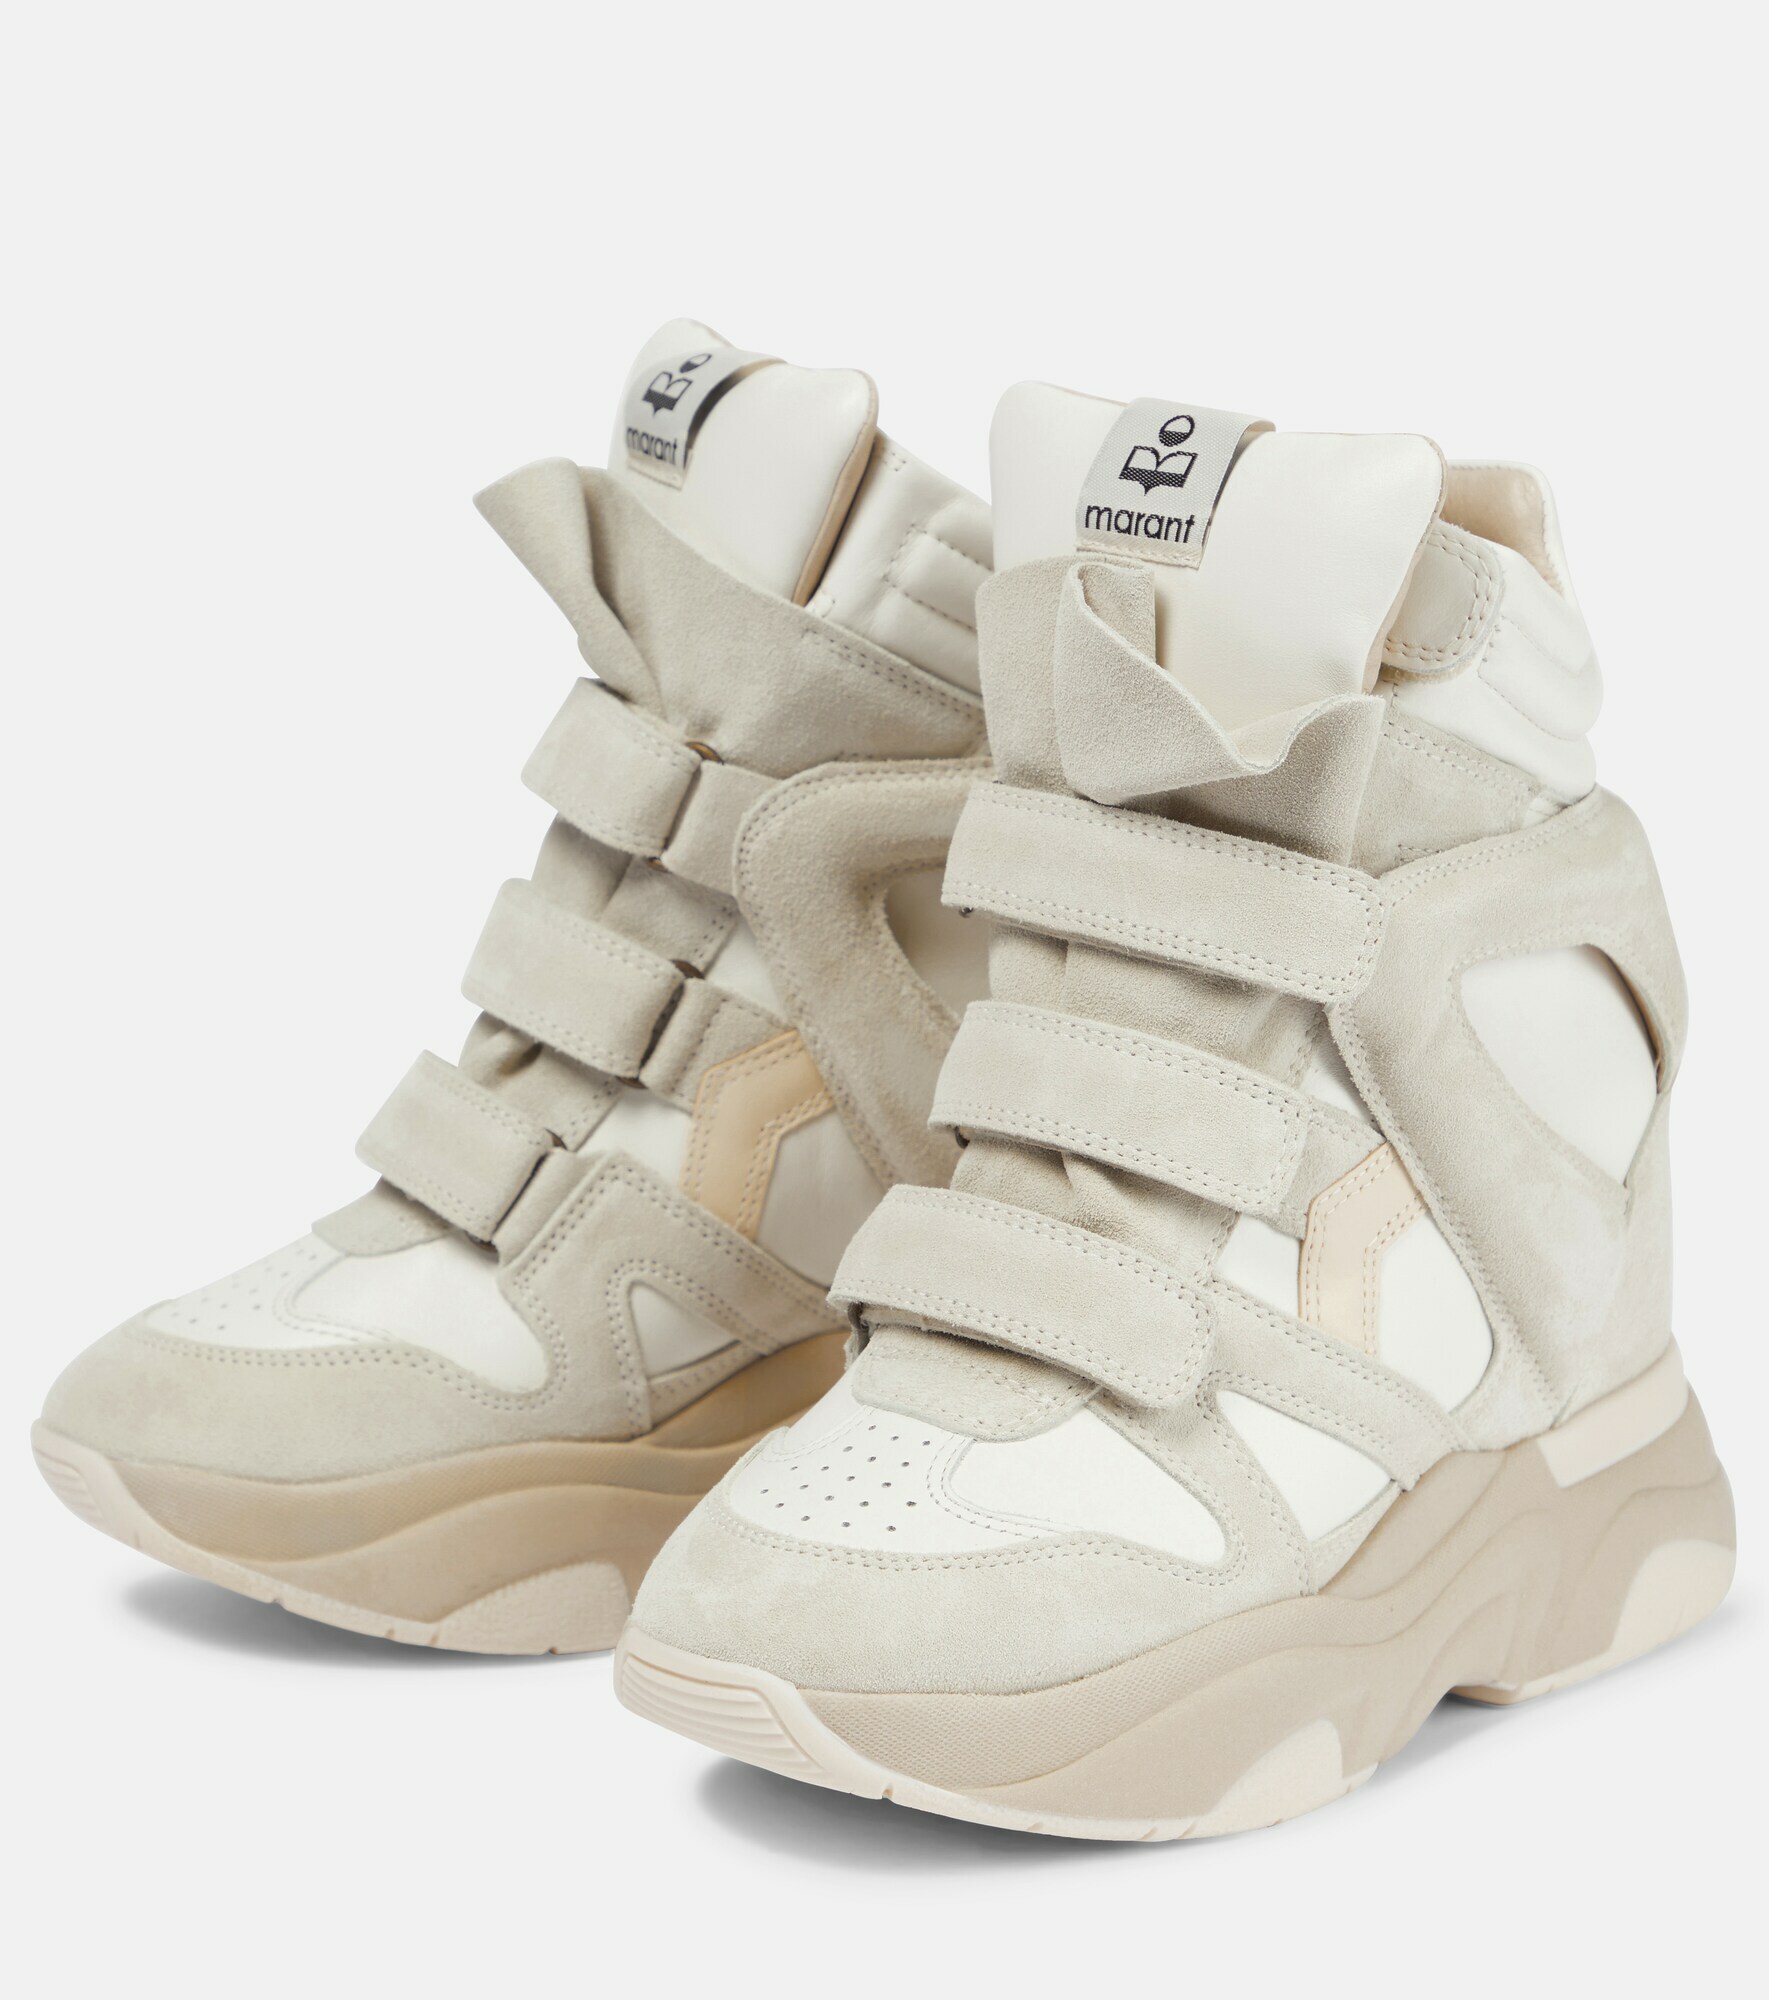 Isabel Marant - Balskee suede and leather wedge sneakers Isabel Marant